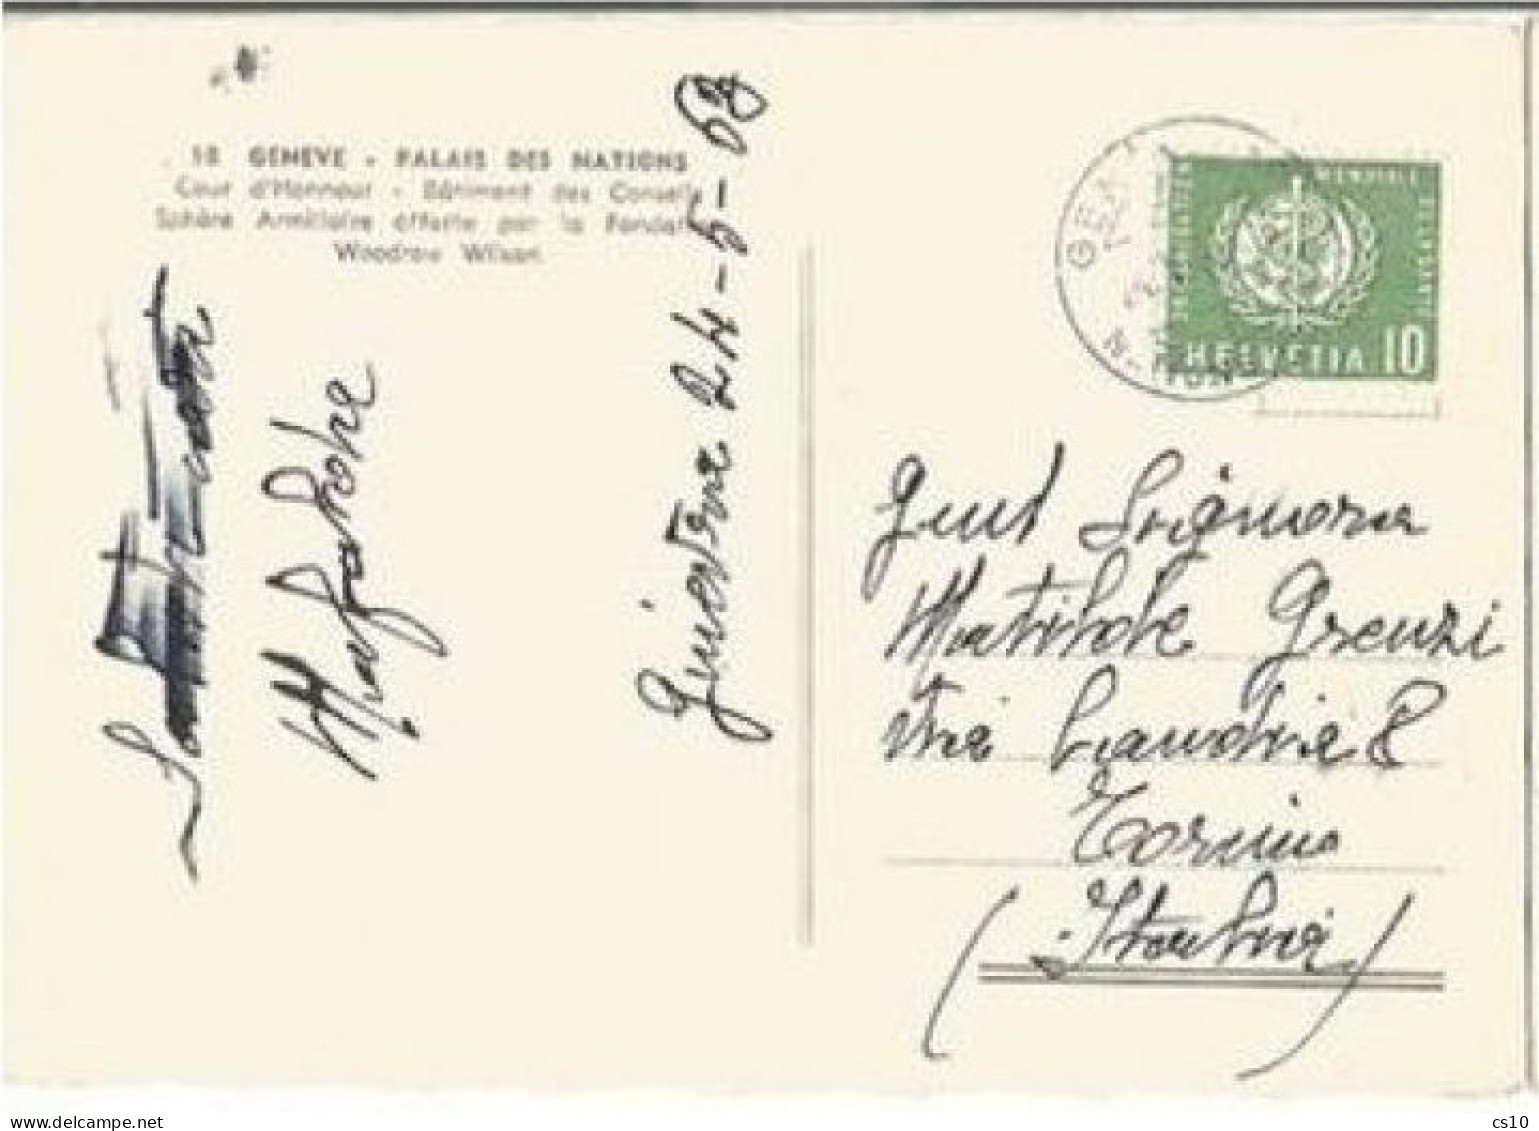 Suisse Service OMS-WHO Nations Unies C.10 Solo Franking Pcard Geneve 24may1963 Official Cachet X Italy - Covers & Documents